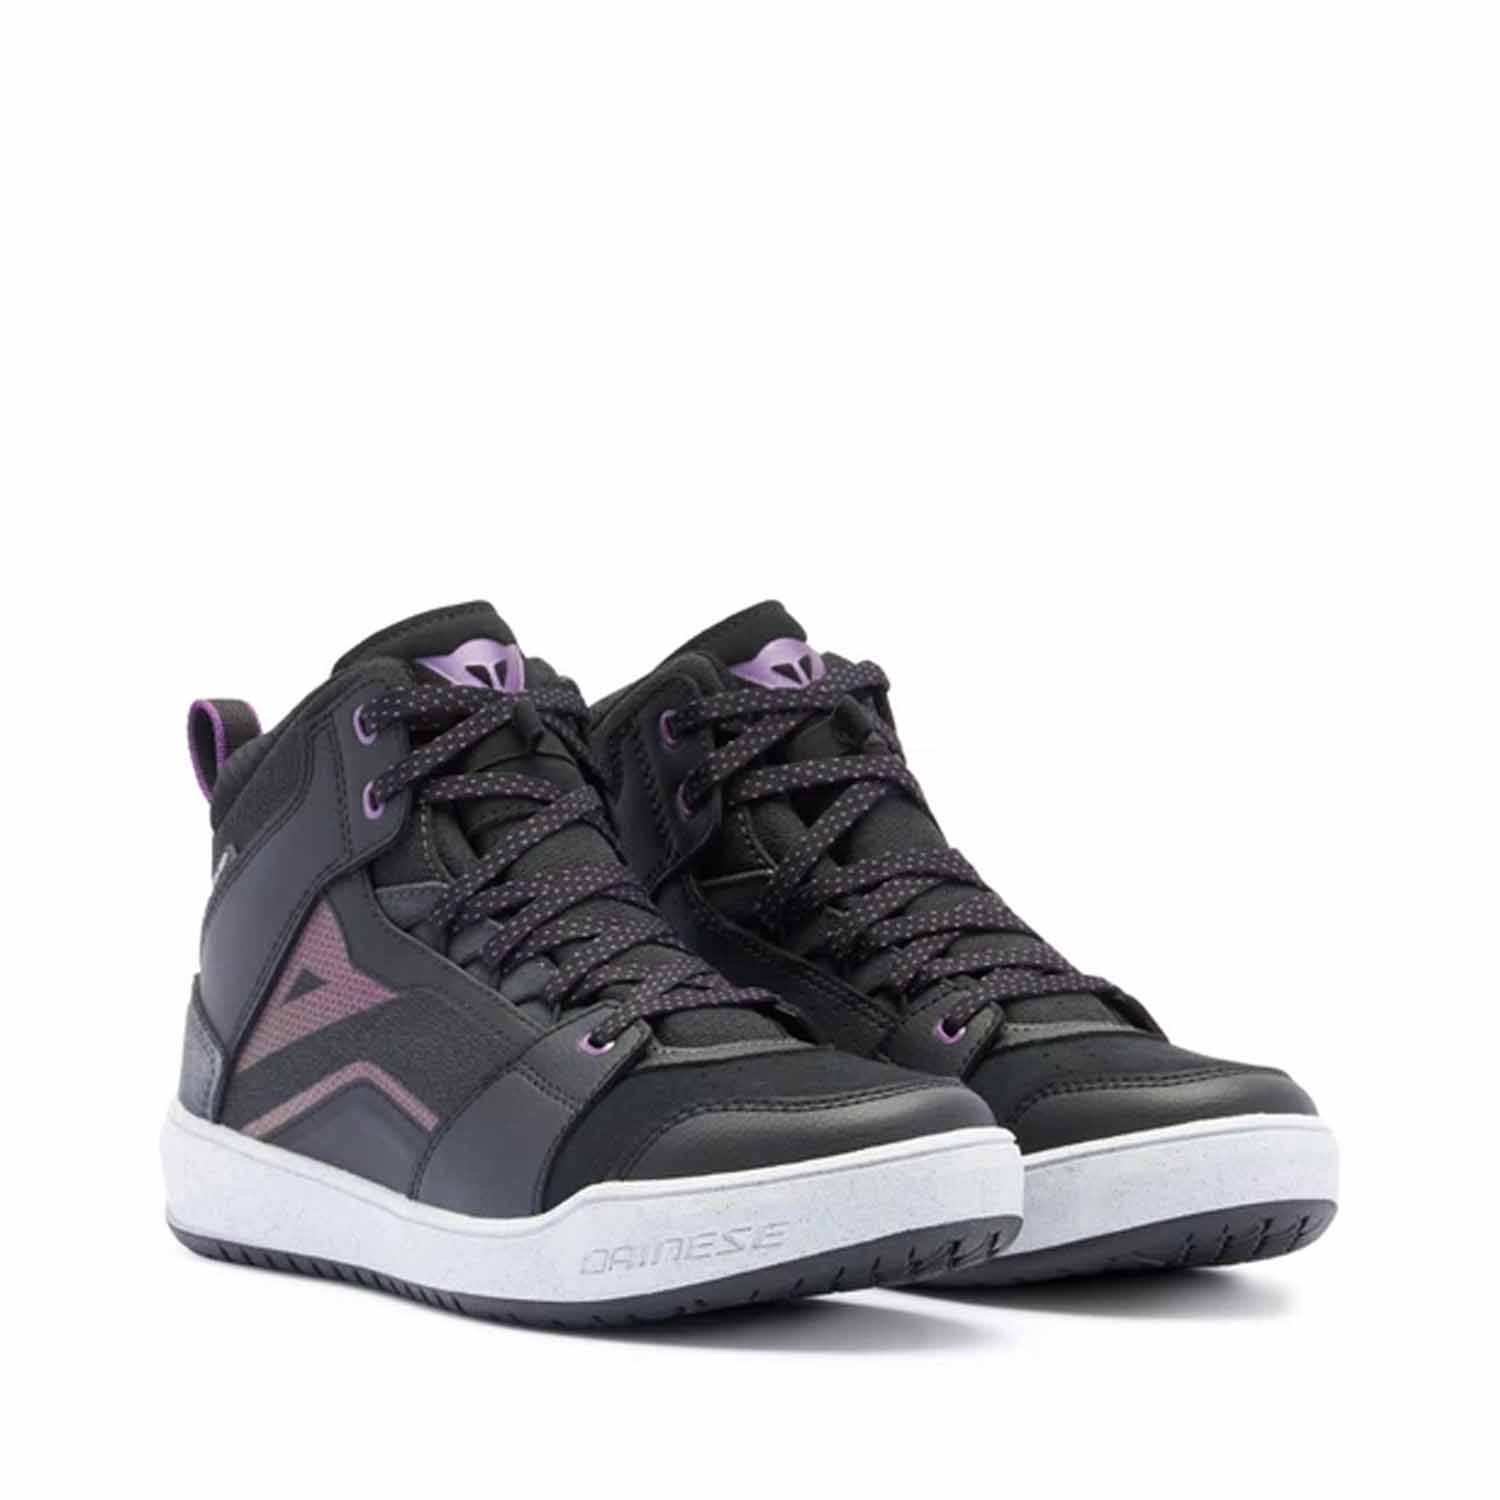 Image of EU Dainese Suburb D-WP Shoes WMN Black White Metal Purple Taille 38